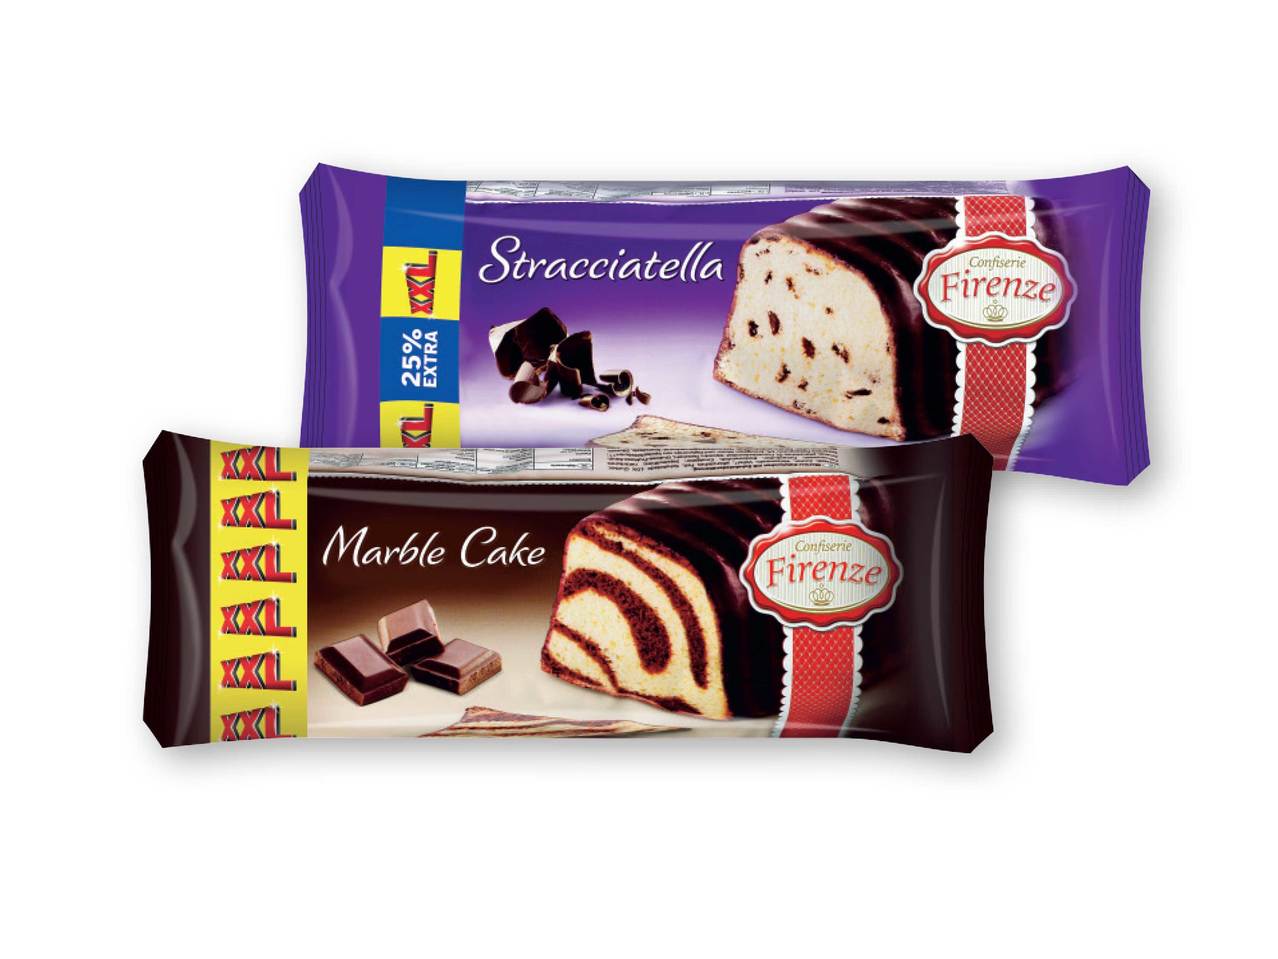 CONFISERIE FIRENZE Foil Wrapped Cakes Lidl — Northern Ireland Specials archive